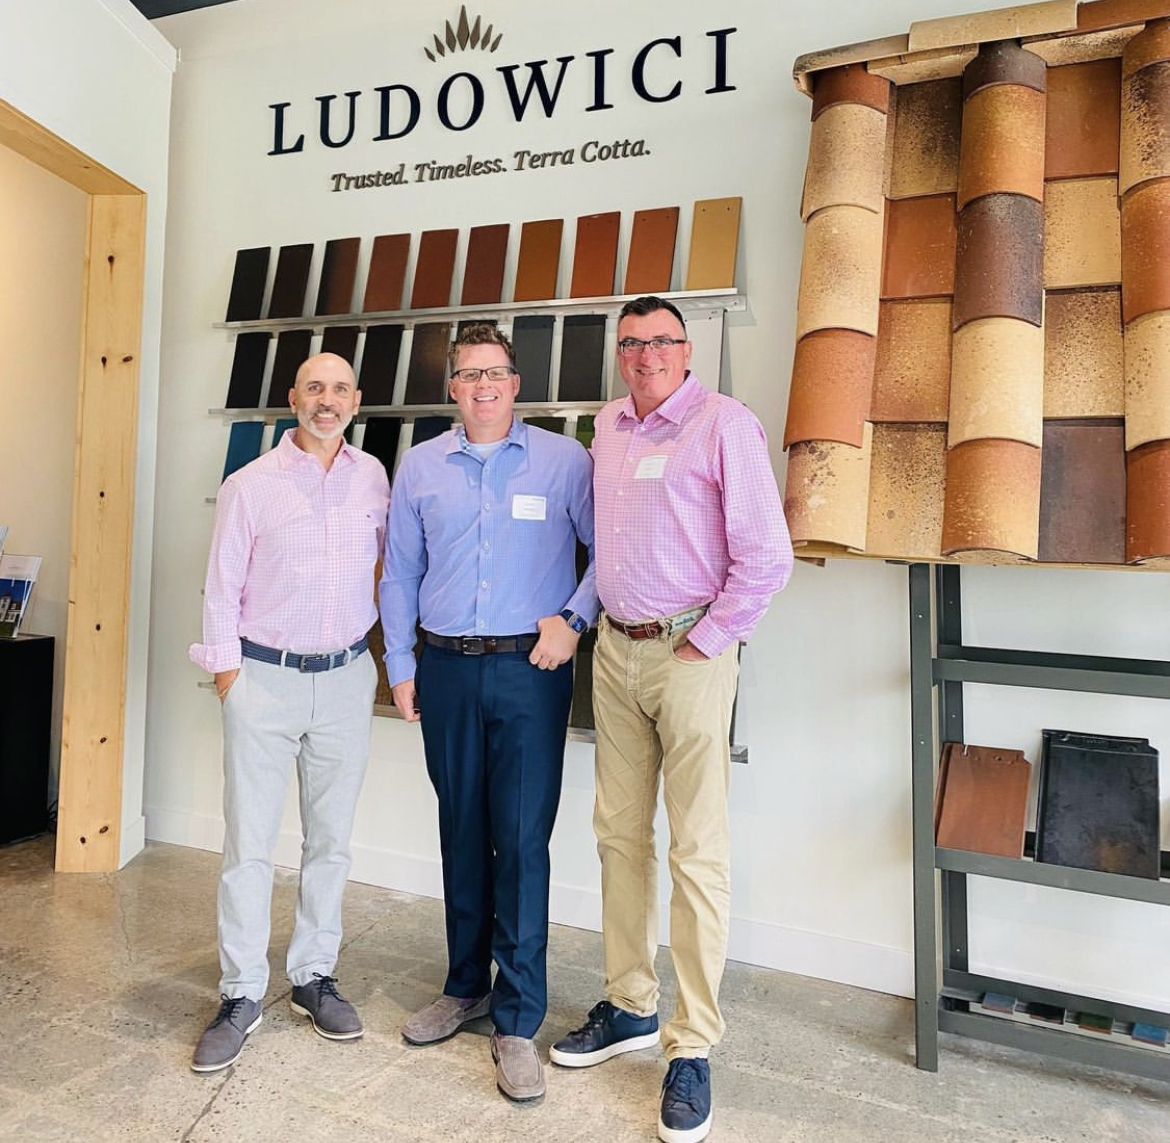 Fabrice Spies of SoCal Building Solutions has successfully represented Ludowici for many years. His mission is to educate, equip and support building owners, homeowners, architects, designers, and contractors in southern California when tile roofing is considered.